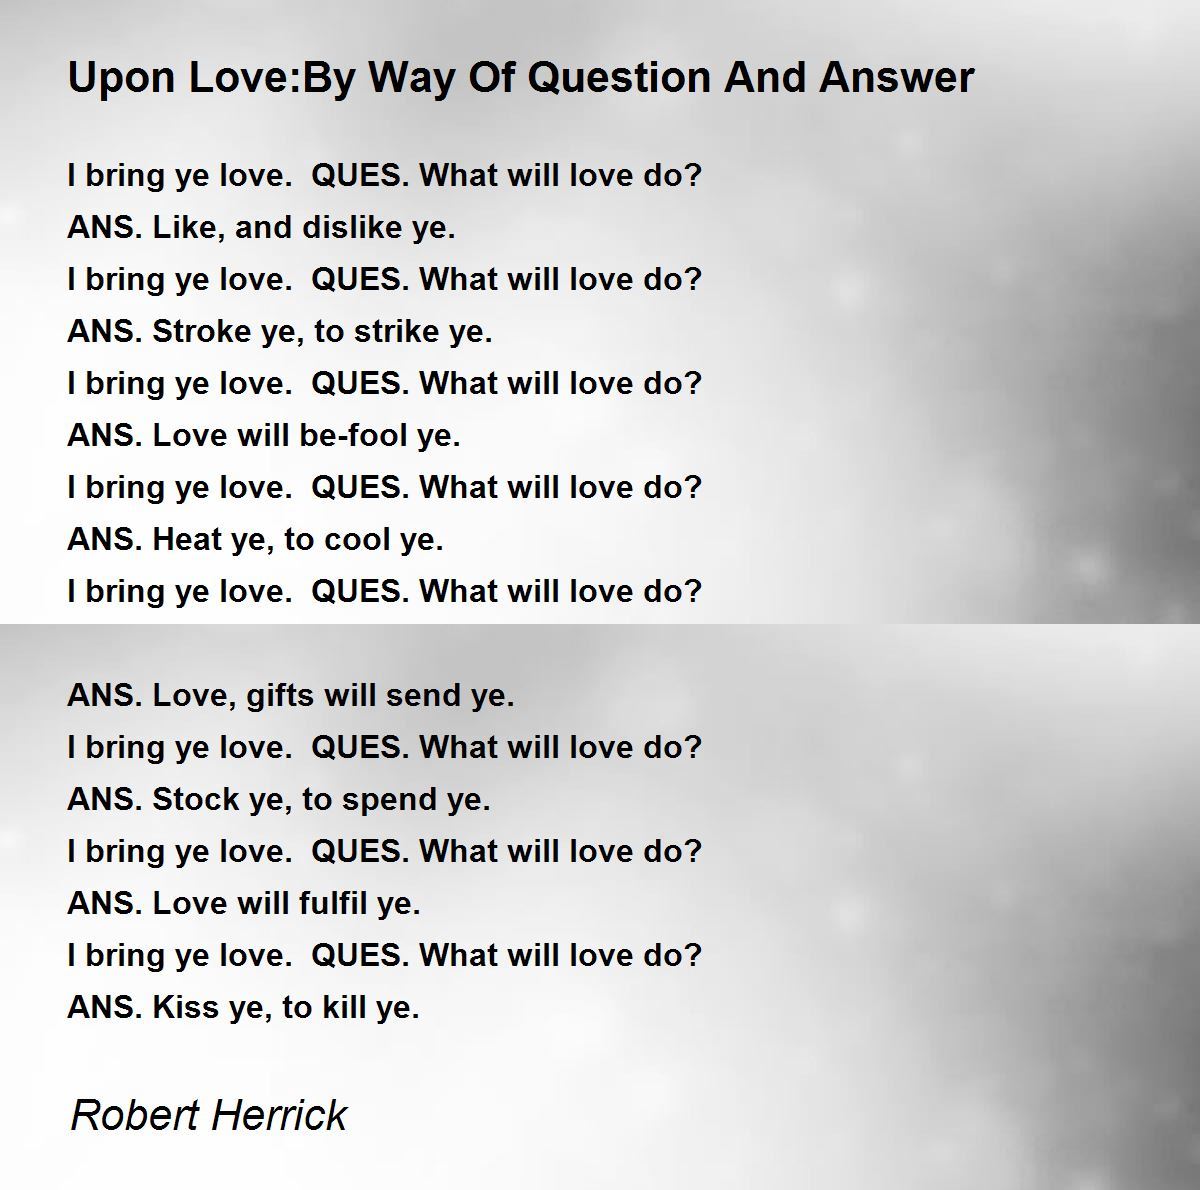 Upon Love:By Way Of Question And Answer Poem by Robert 